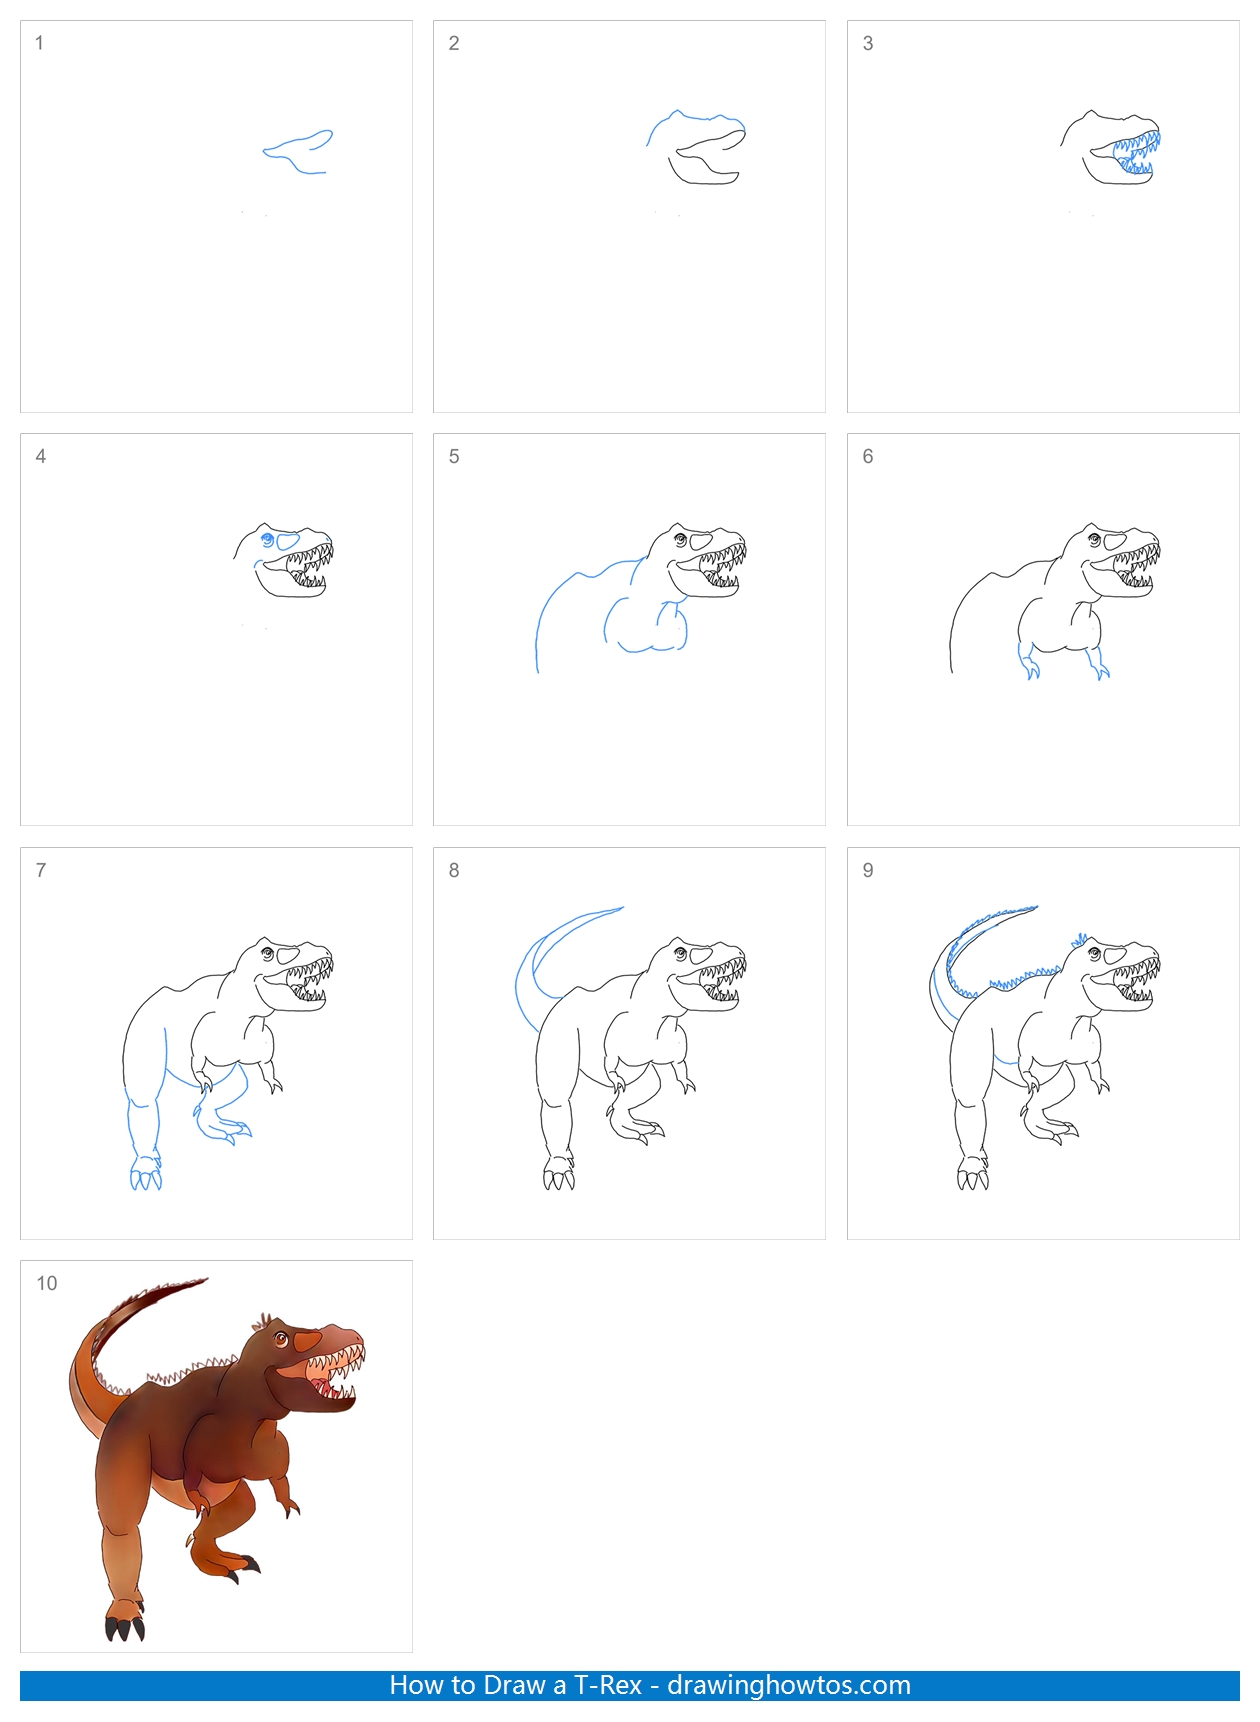 How to Draw a TRex Easy Step by Step Easy Drawing Guides Drawing